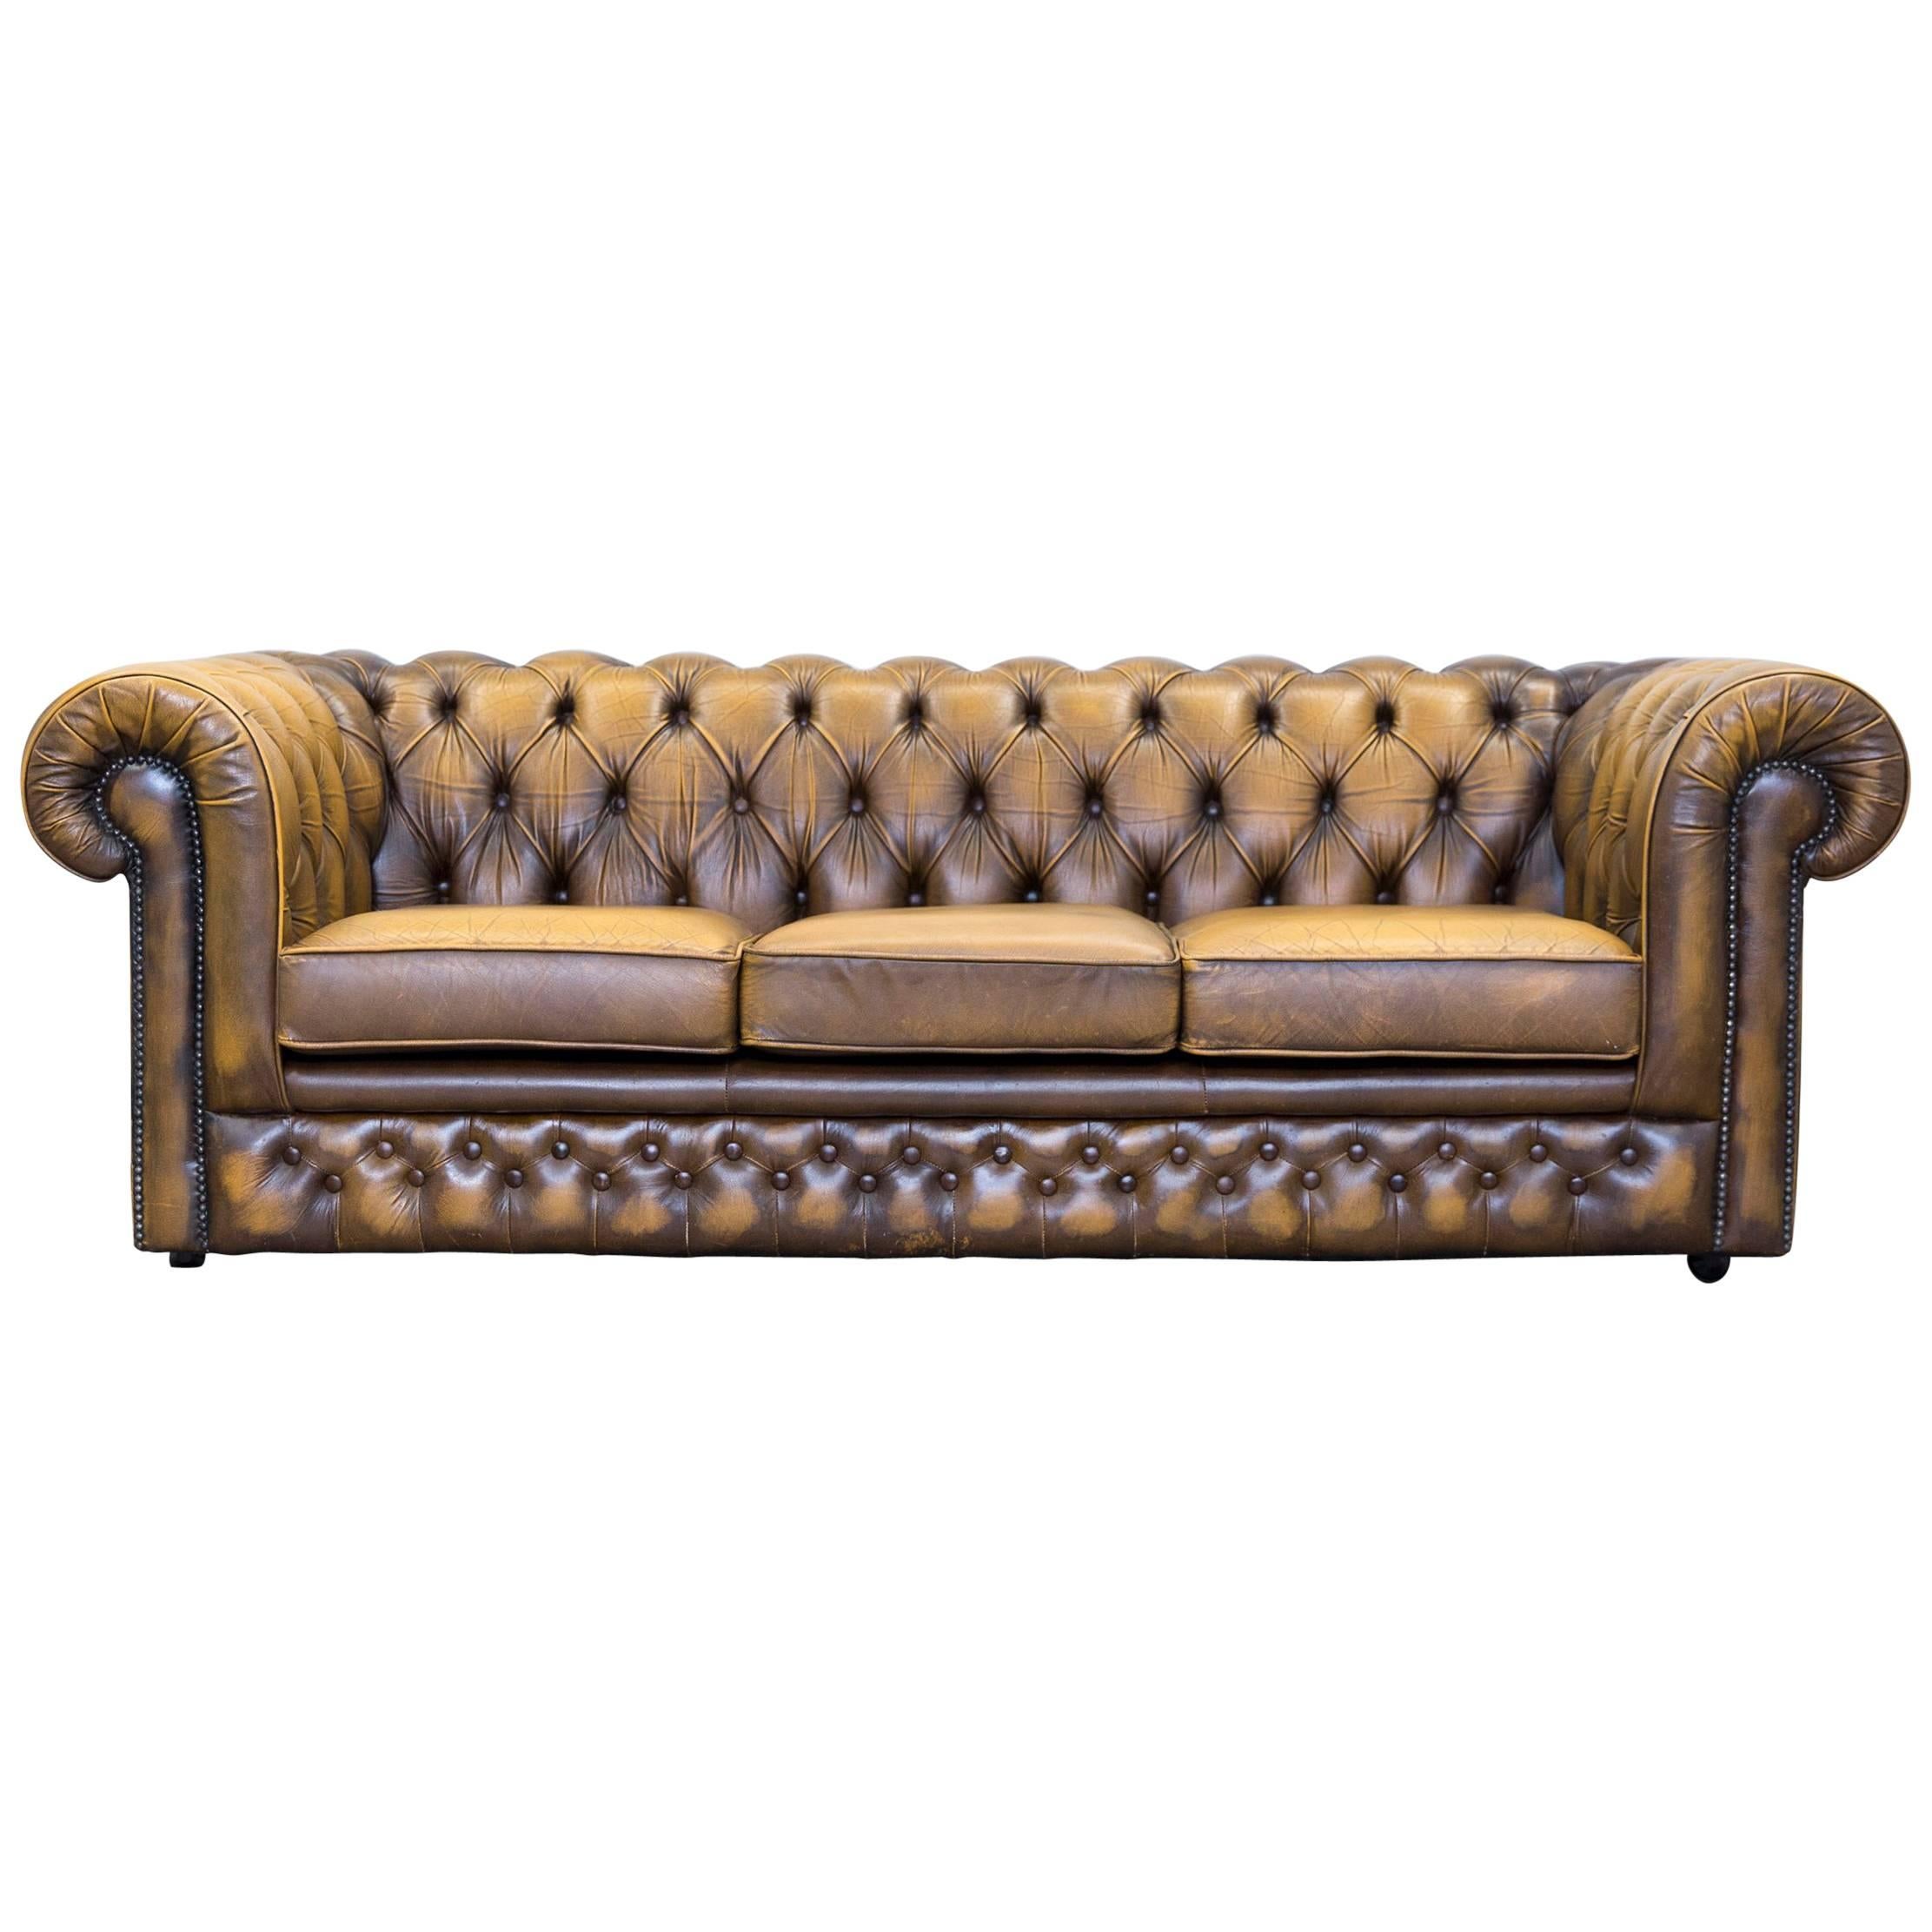 Thomas Lloyd Chesterfield Leather Sofa Ocre Brown Three-Seat Couch Retro Vintage